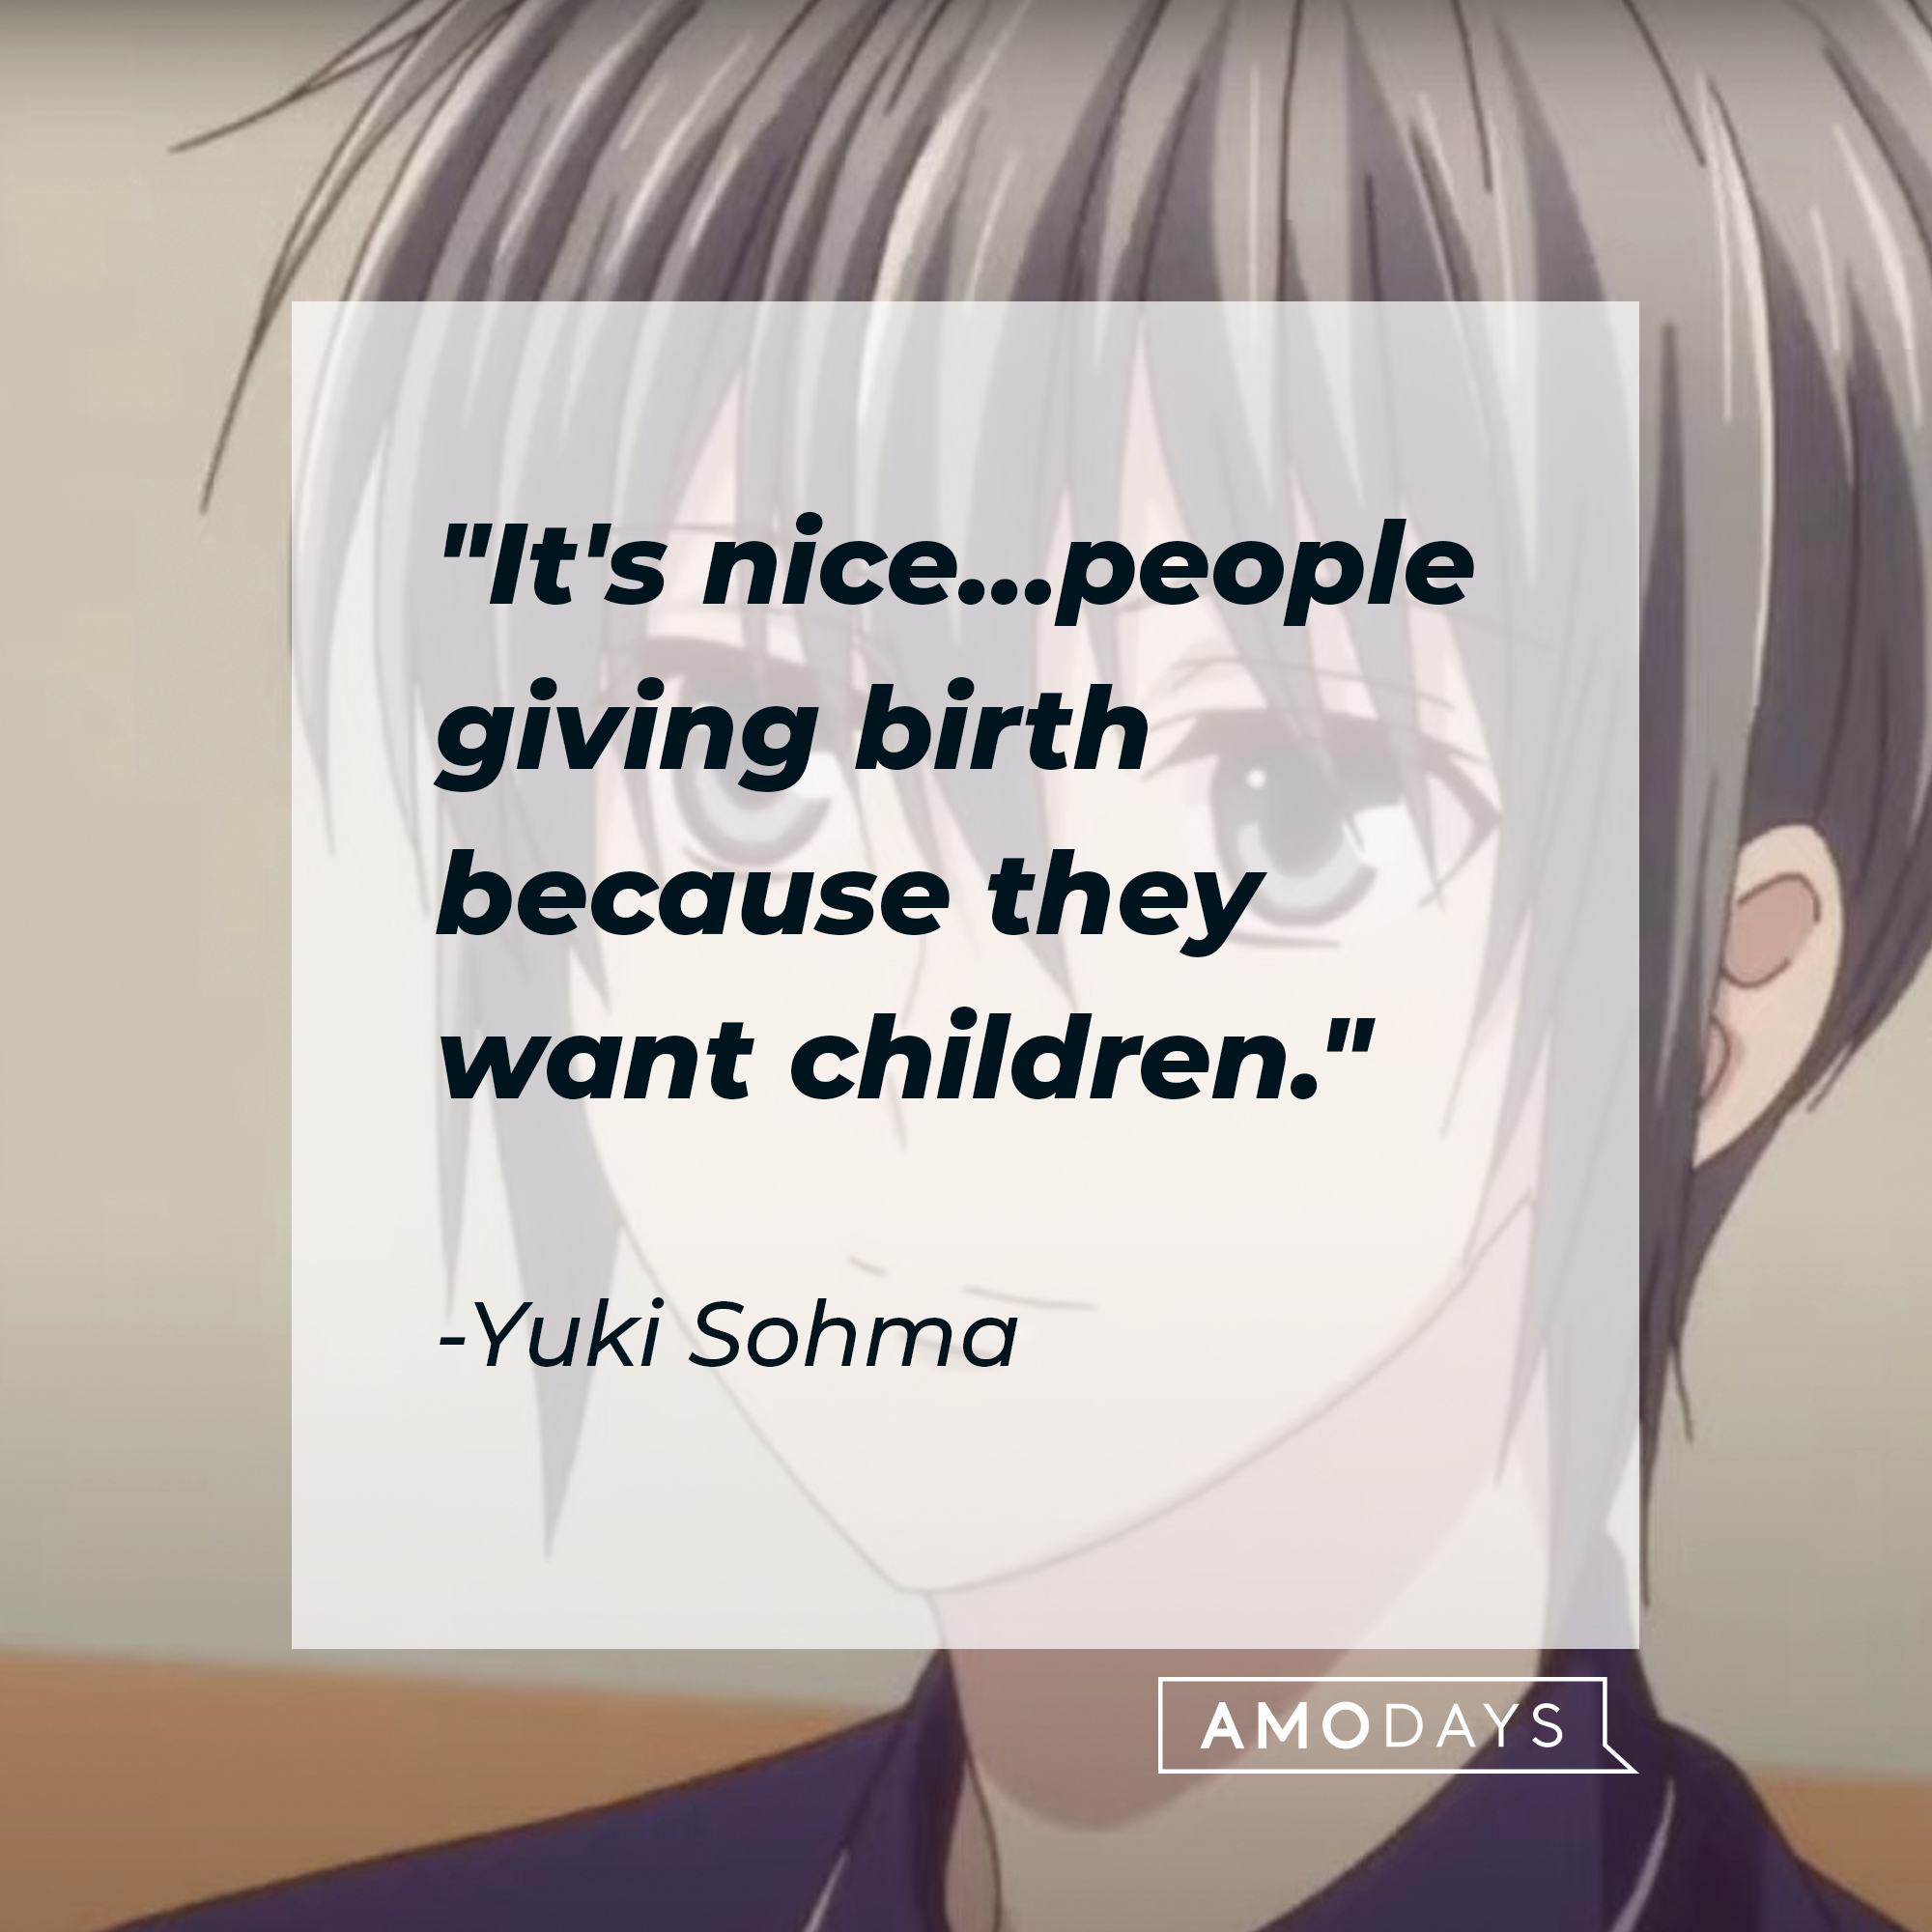 Yuki Sohma's quote: "It's nice… people giving birth because they want children." | Source: Facebook.com/FruitsBasketOfficial